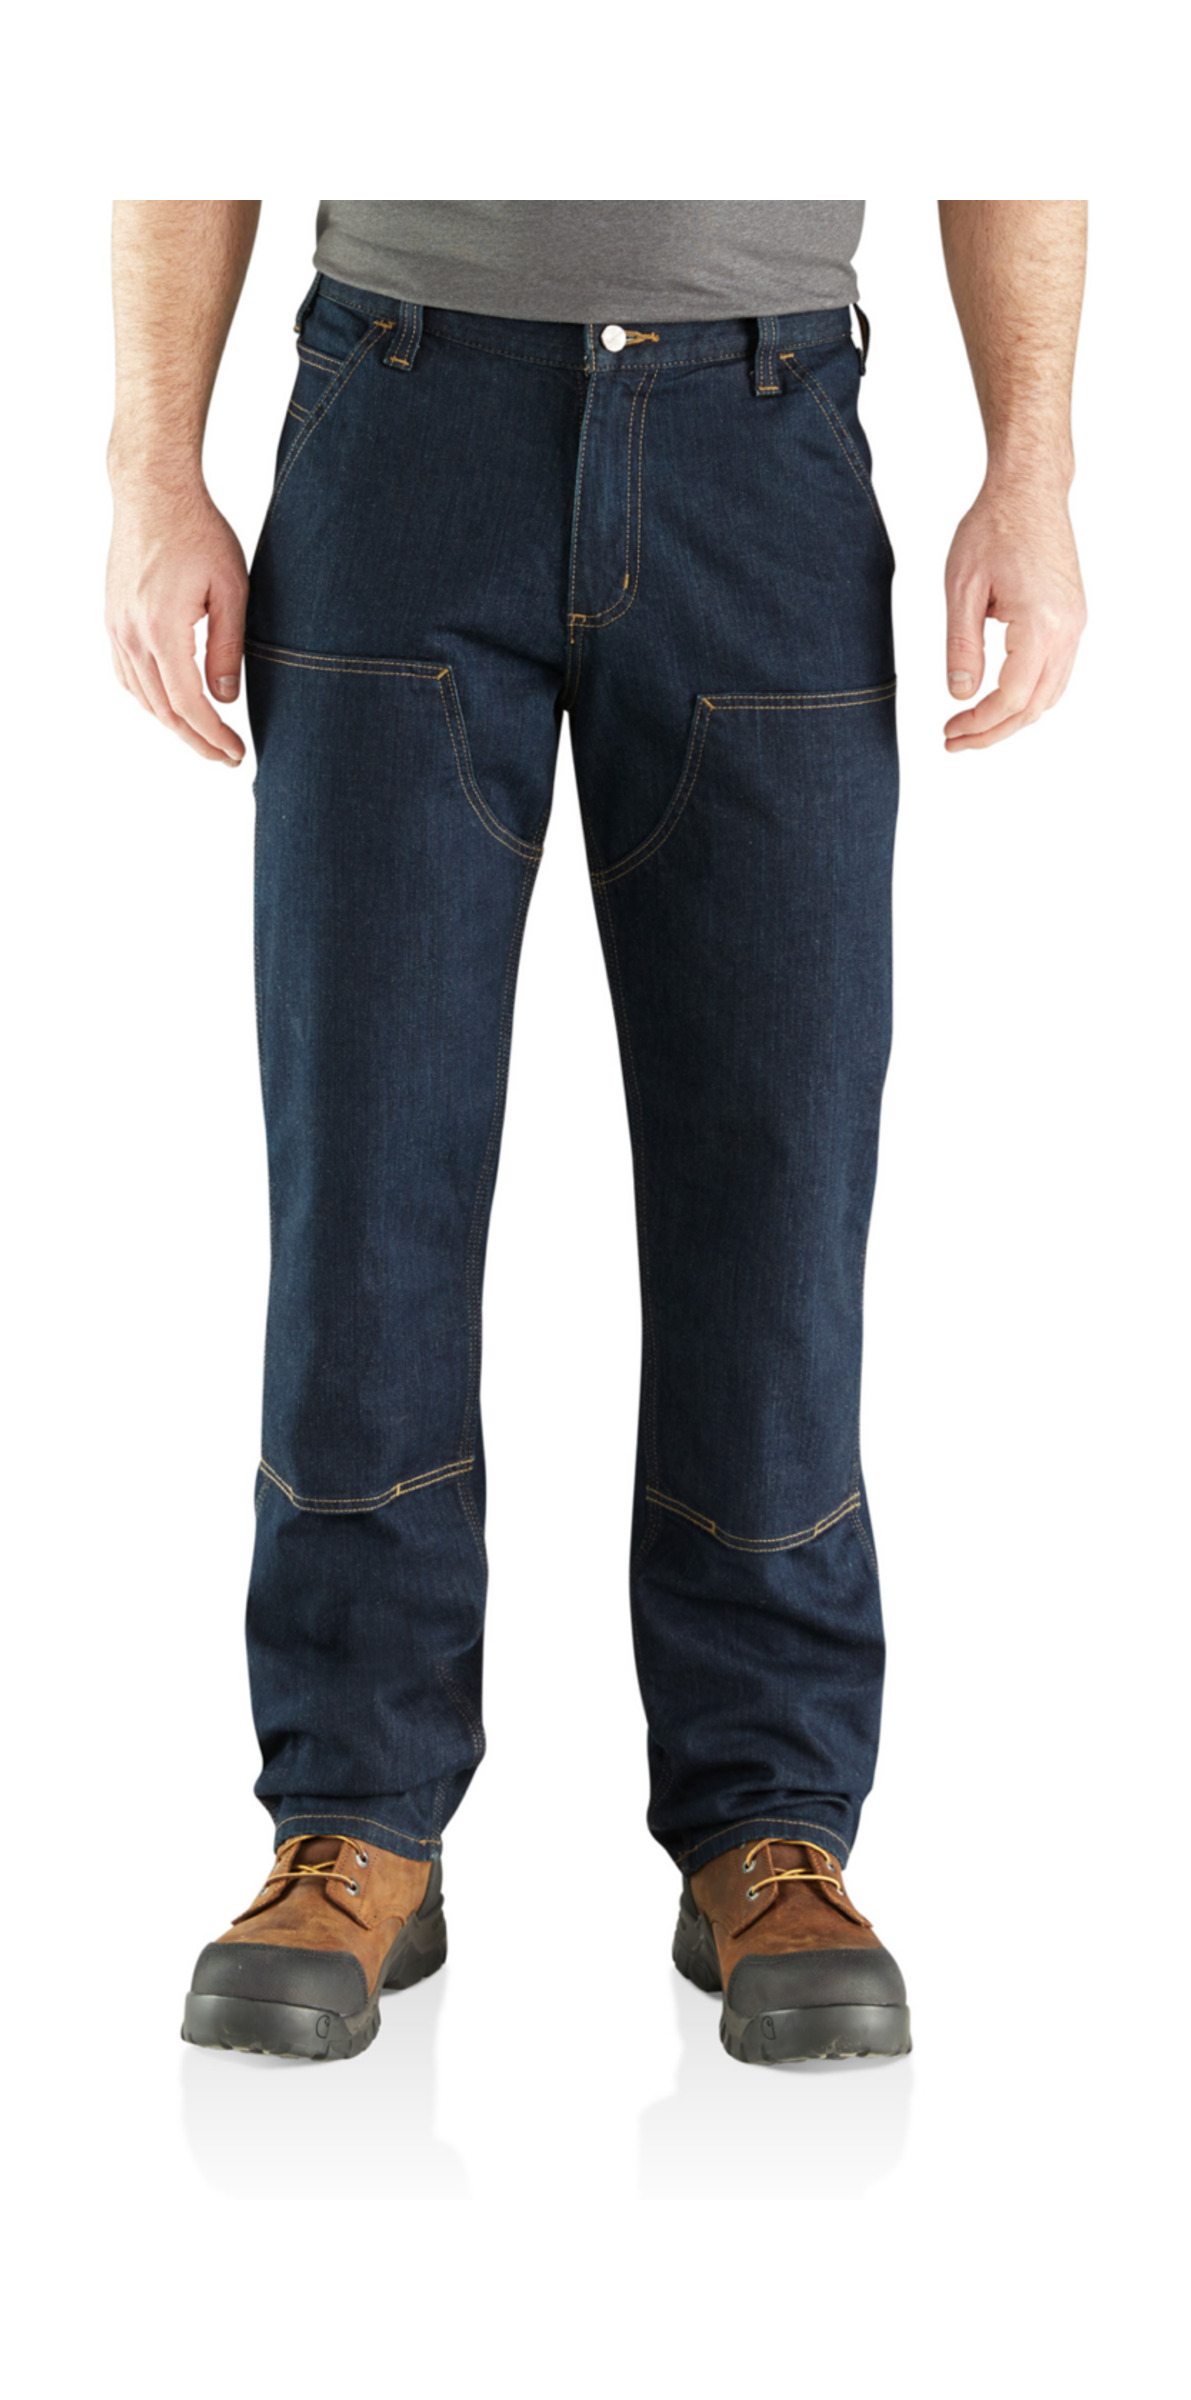 Carhartt Double Front Dungaree Jeans - Erie - W36/L34